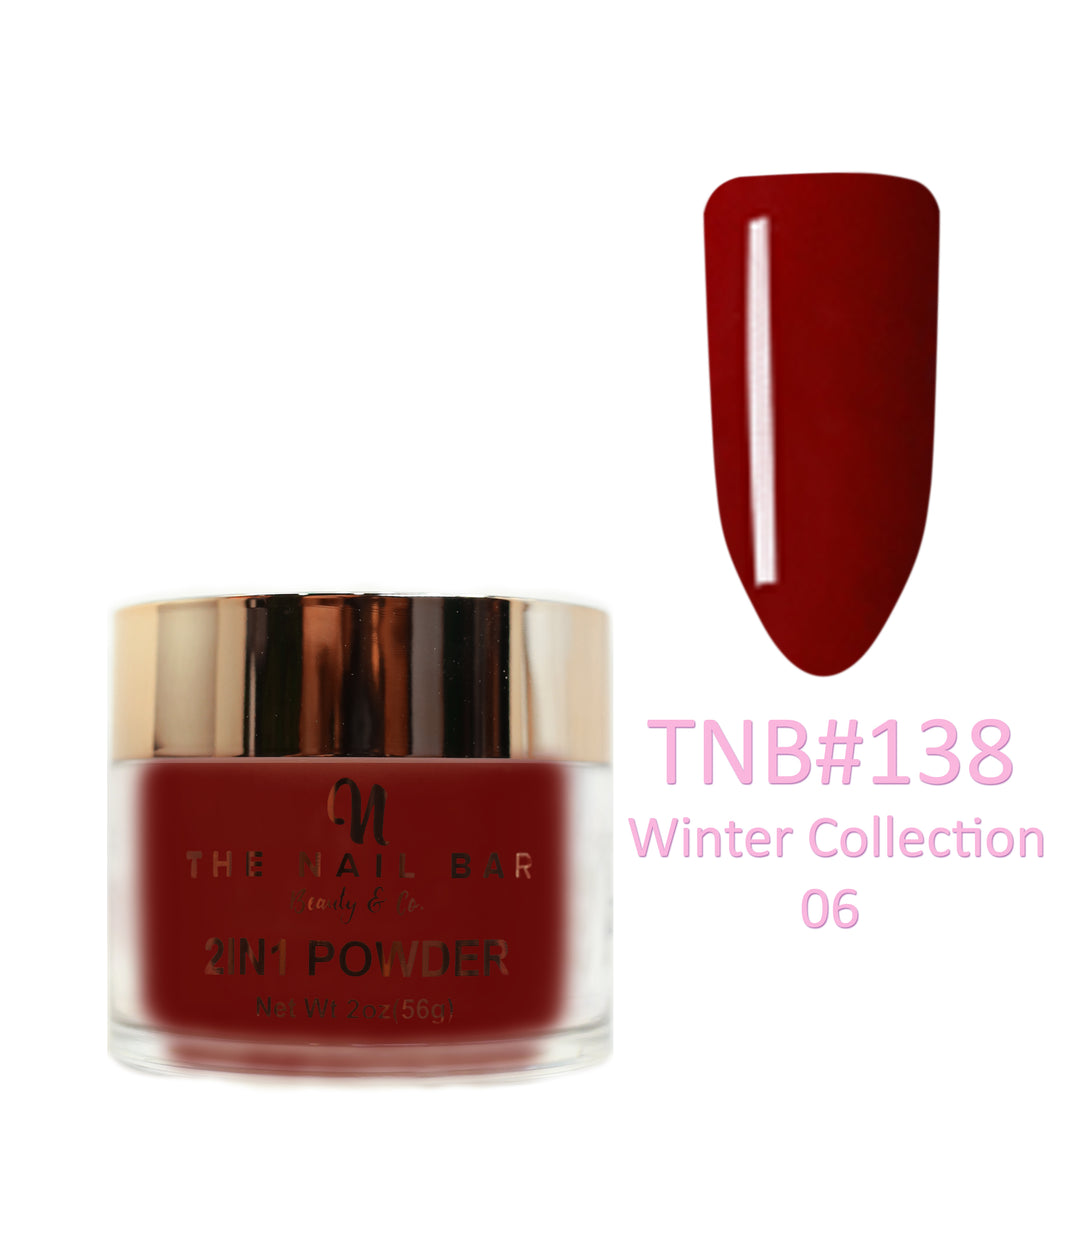 2-In-1 Dipping/Acrylic colour powder (2oz) -Winter collection 06 - The Nail Bar Beauty & Co.